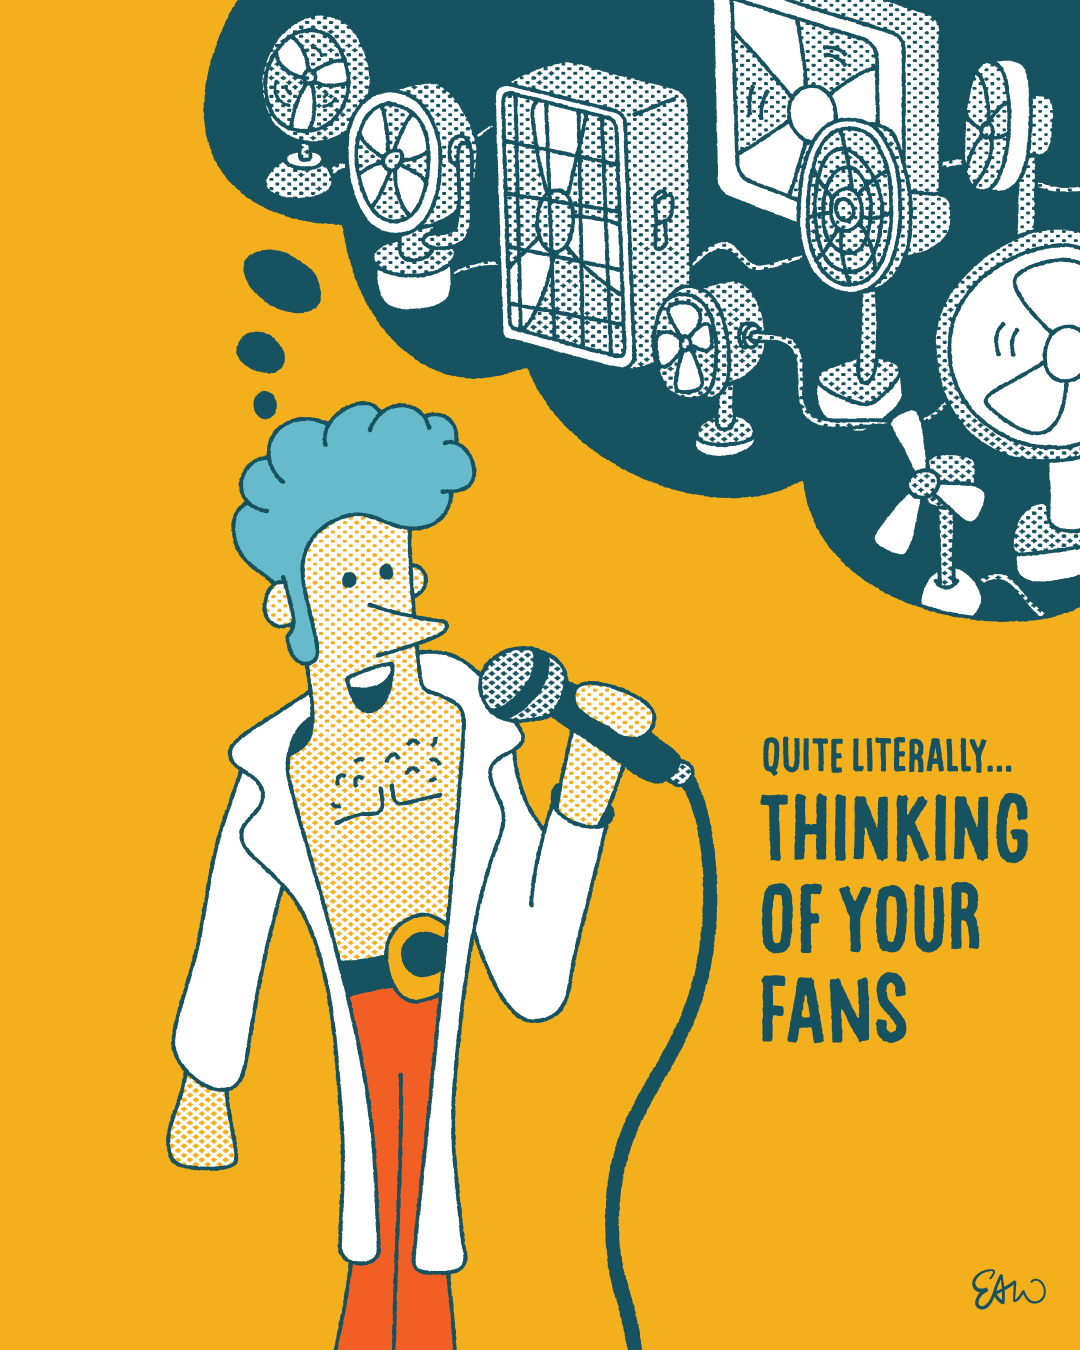 Single panel comic drawn in a retro style with vintage tones of teal, orange, and yellow. In the foreground, a cartoonish character is holding a microphone and is dressed in a lavish costume and sports a hairstyle reminiscent of Elvis Presley. Above is a thought bubble showing a collection of different table-top fans in various sizes. The caption reads, “Quite literally... thinking of your fans.”